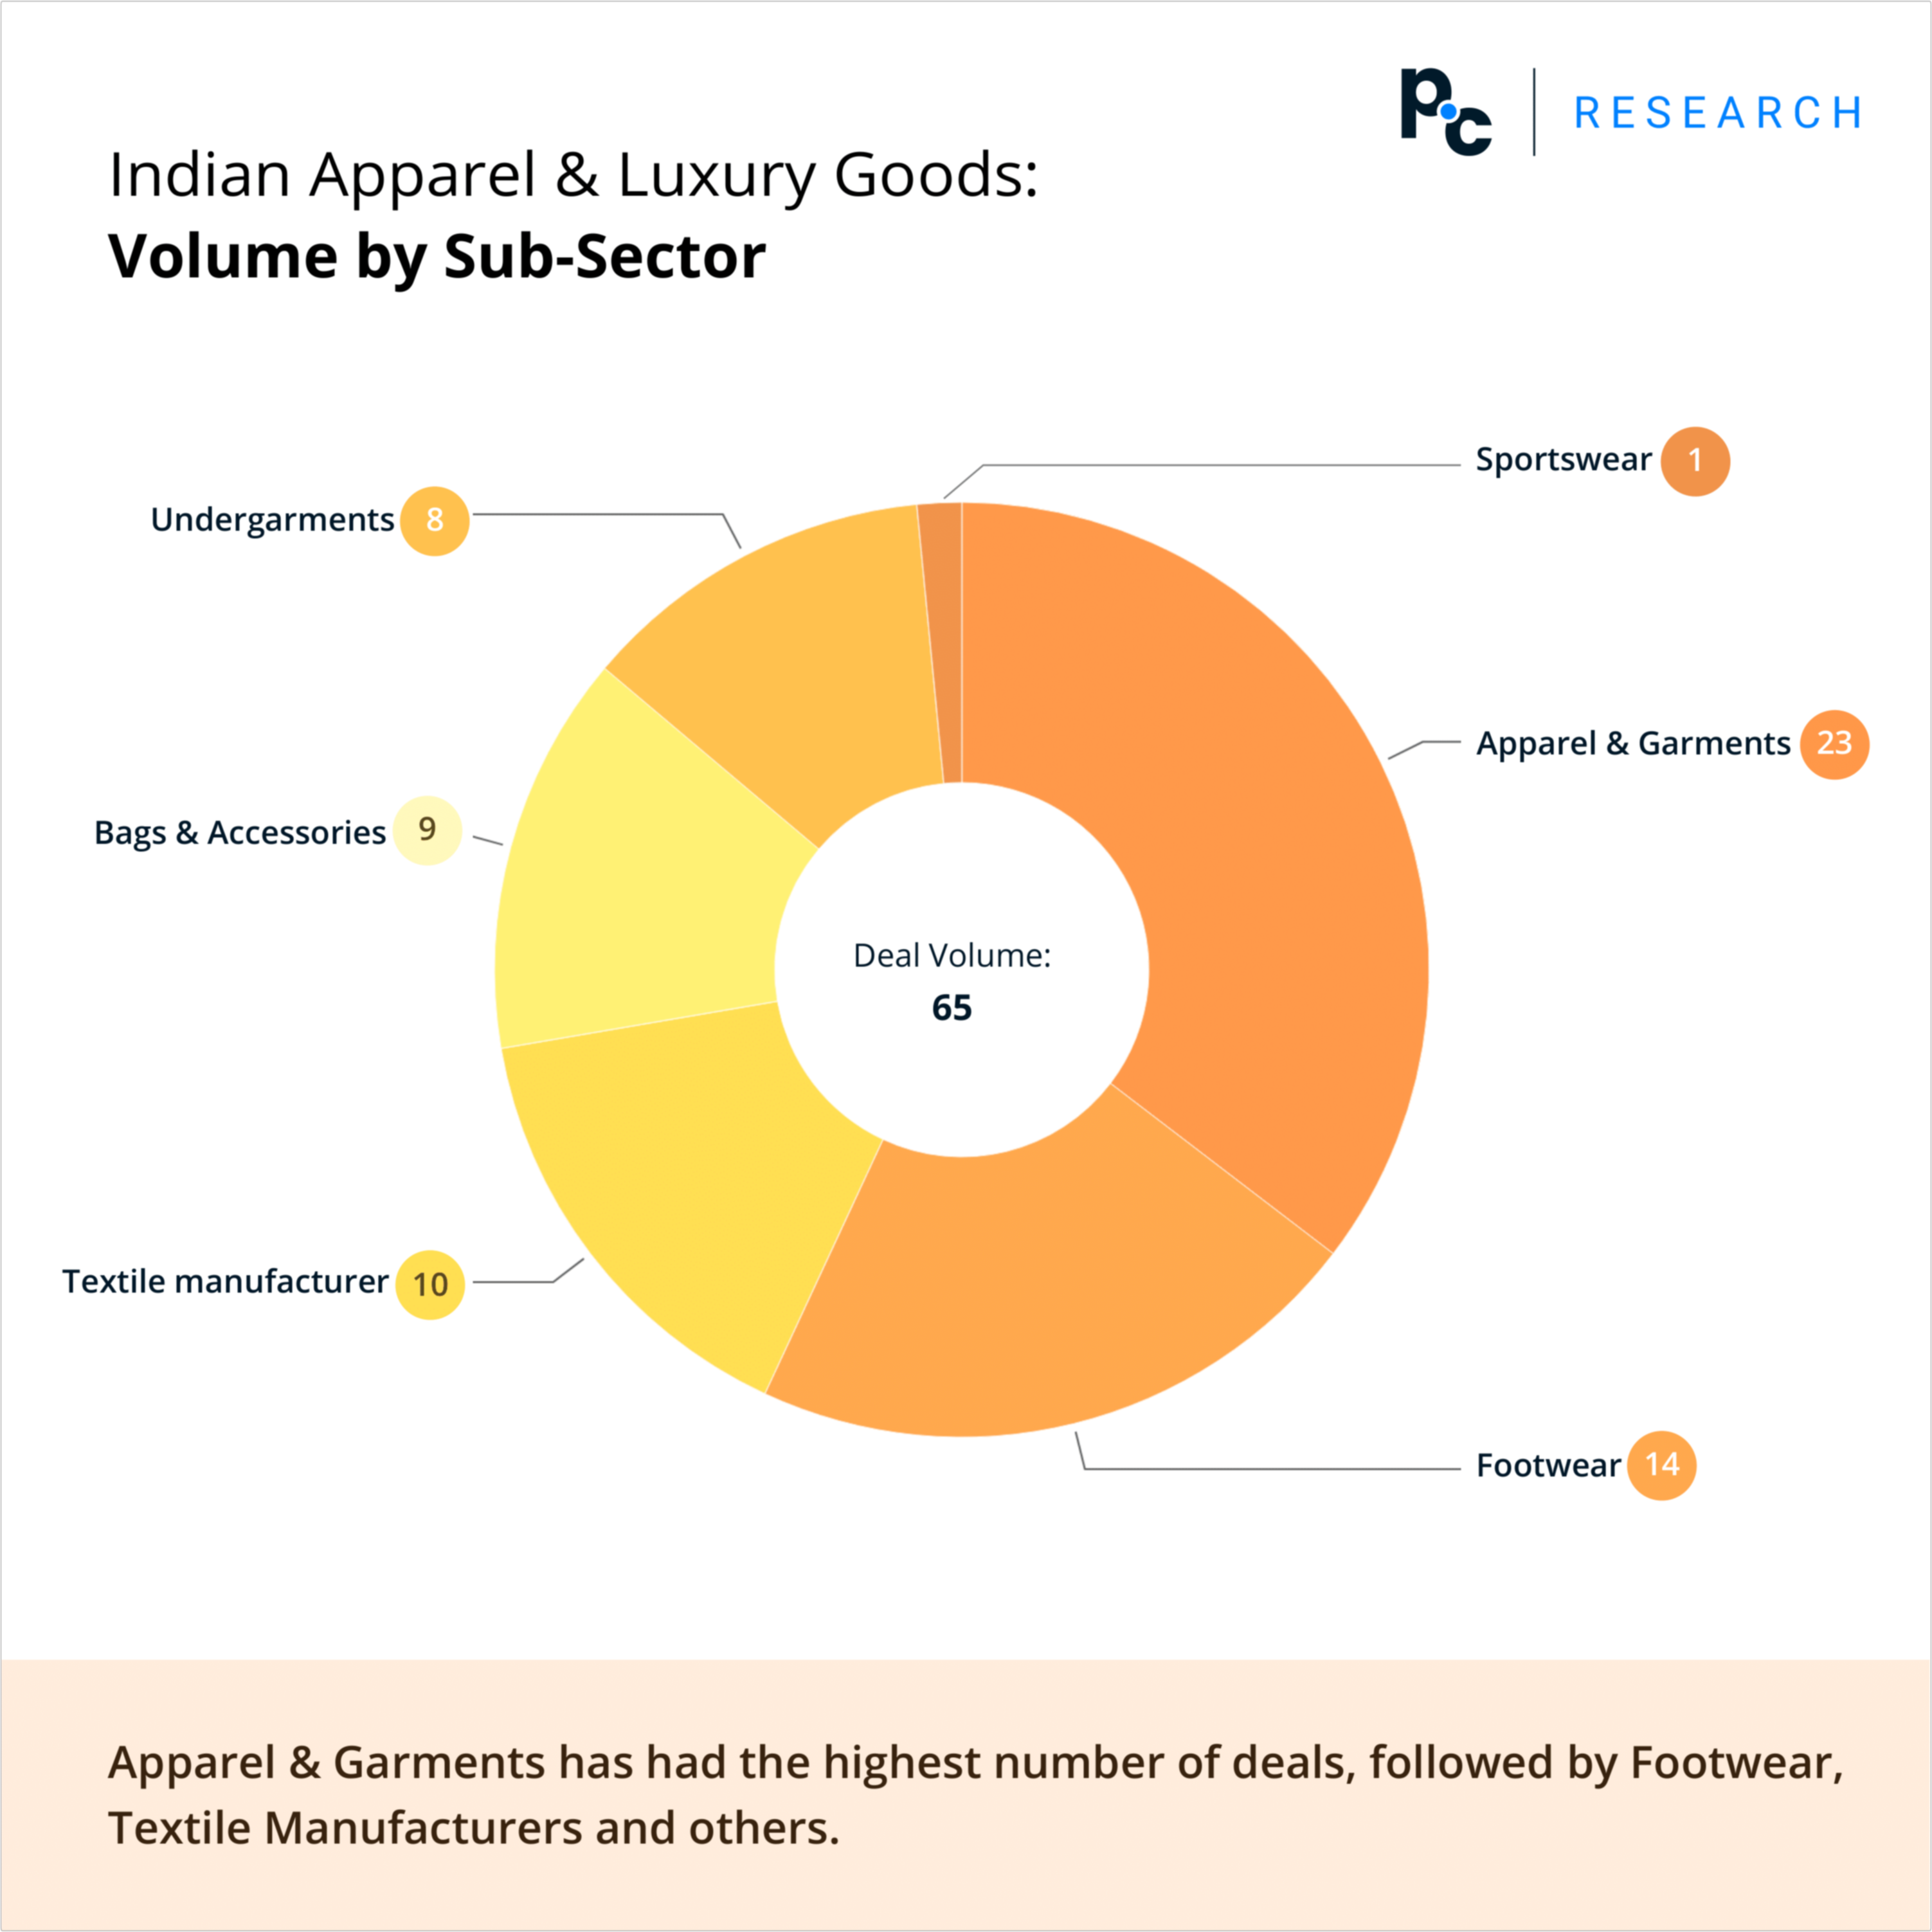 Indian Apparel & Luxury Goods: Volume by Sub-Sector.

Apparel & Garments has had the highest number of deals, followed by Footwear, Textile Manufacturers, and others.